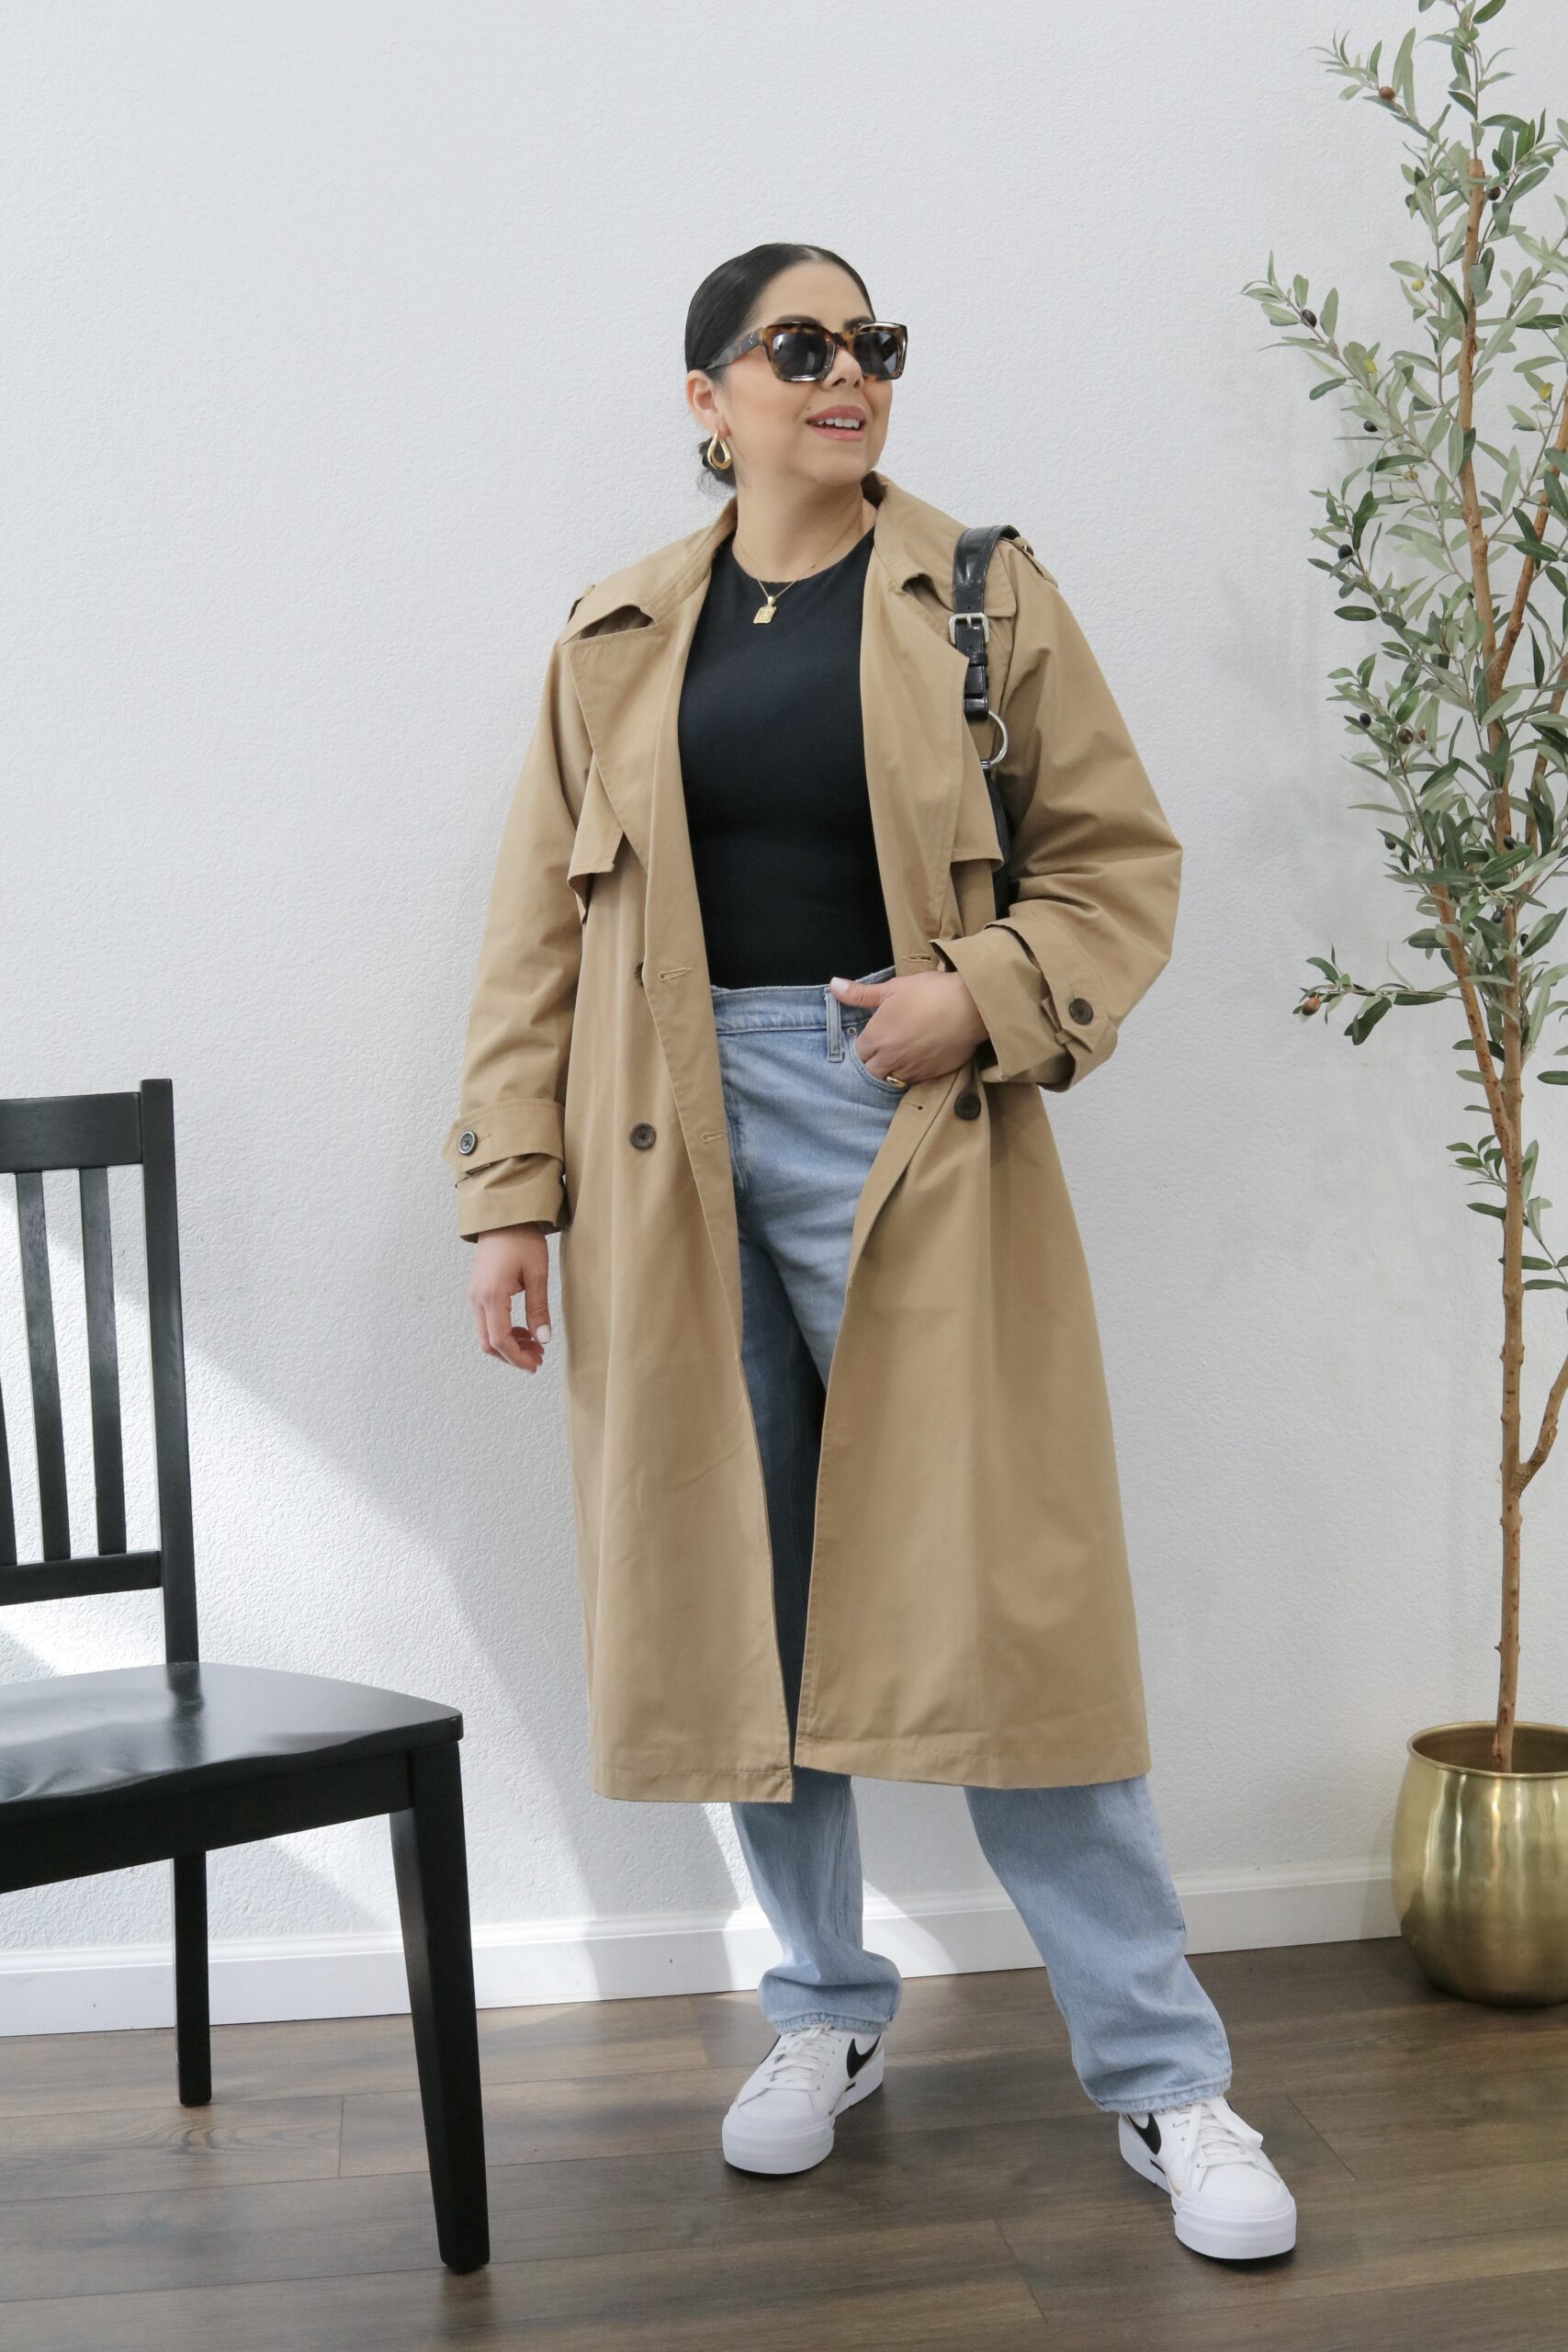 6 WAYS TO STYLE A TRENCH COAT FOR SPRING 2023